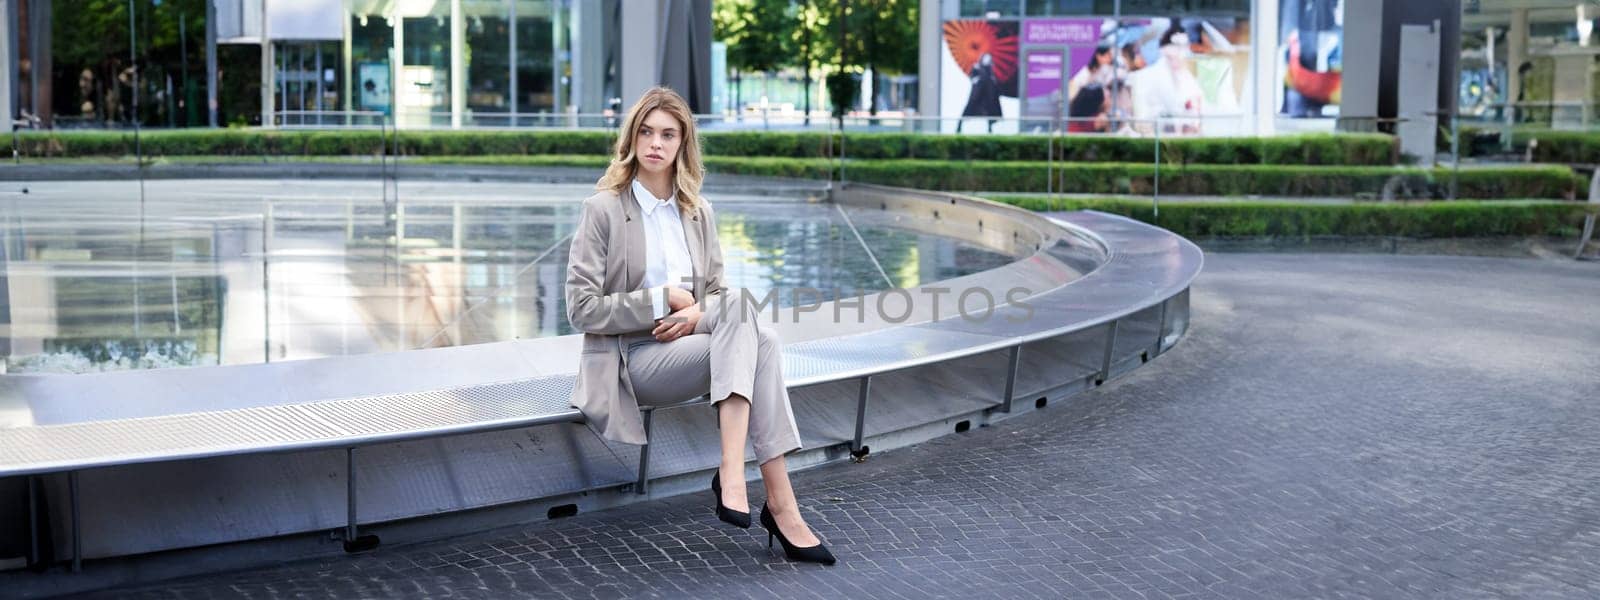 Businesswoman sitting alone on empty street near fountain. Female entrepreneur outdoors in suit and heels.